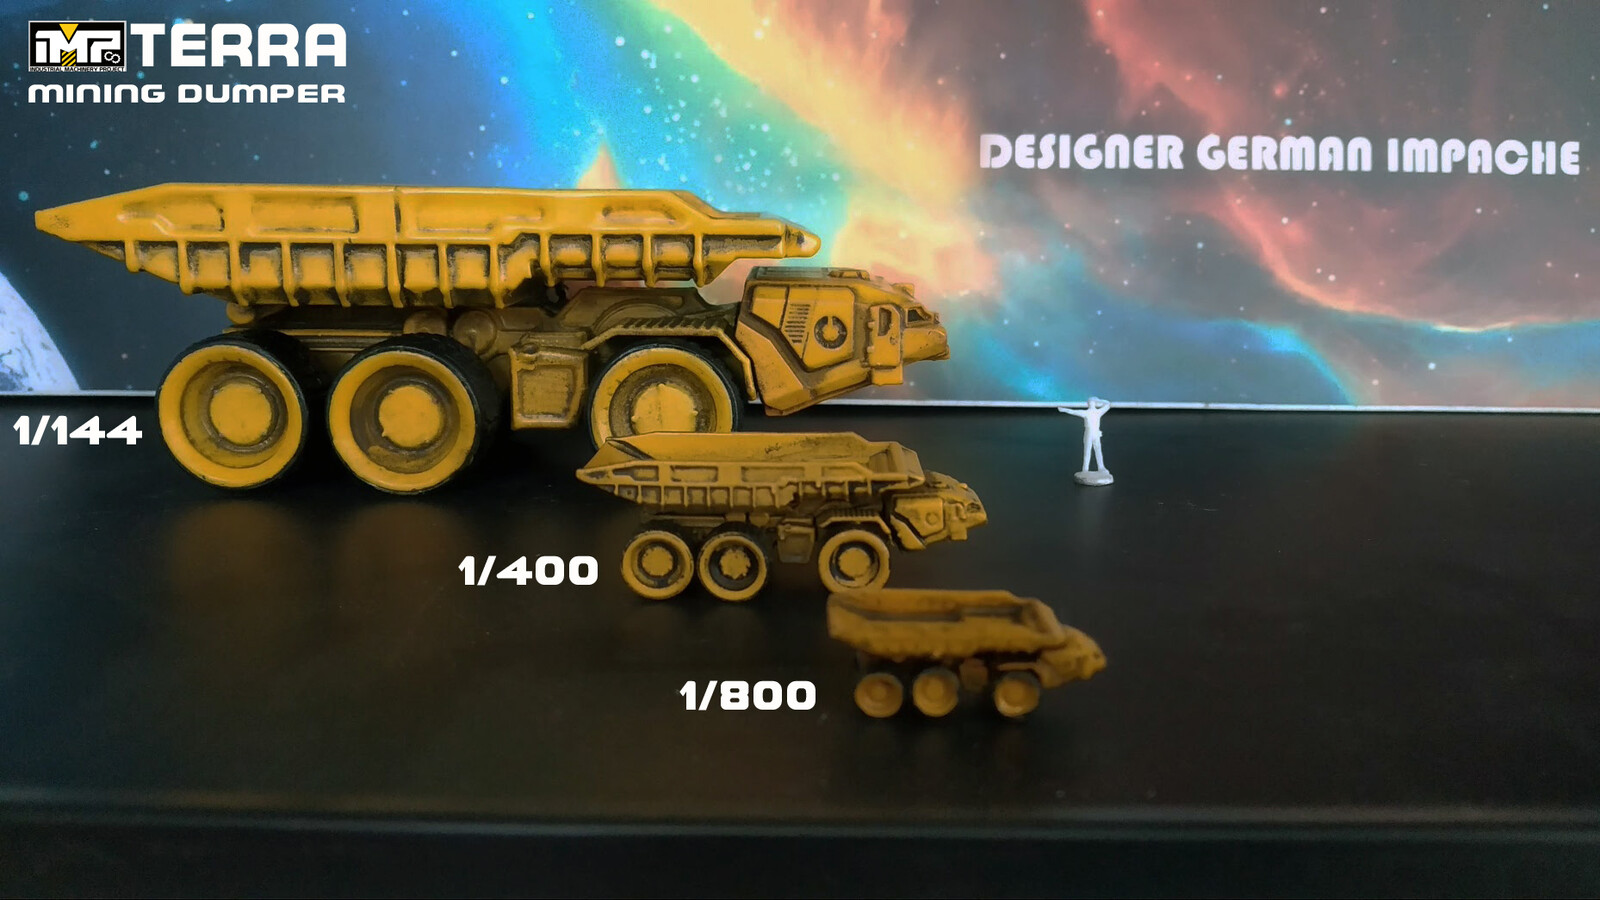 IMP industrial machinery project
comparison scale